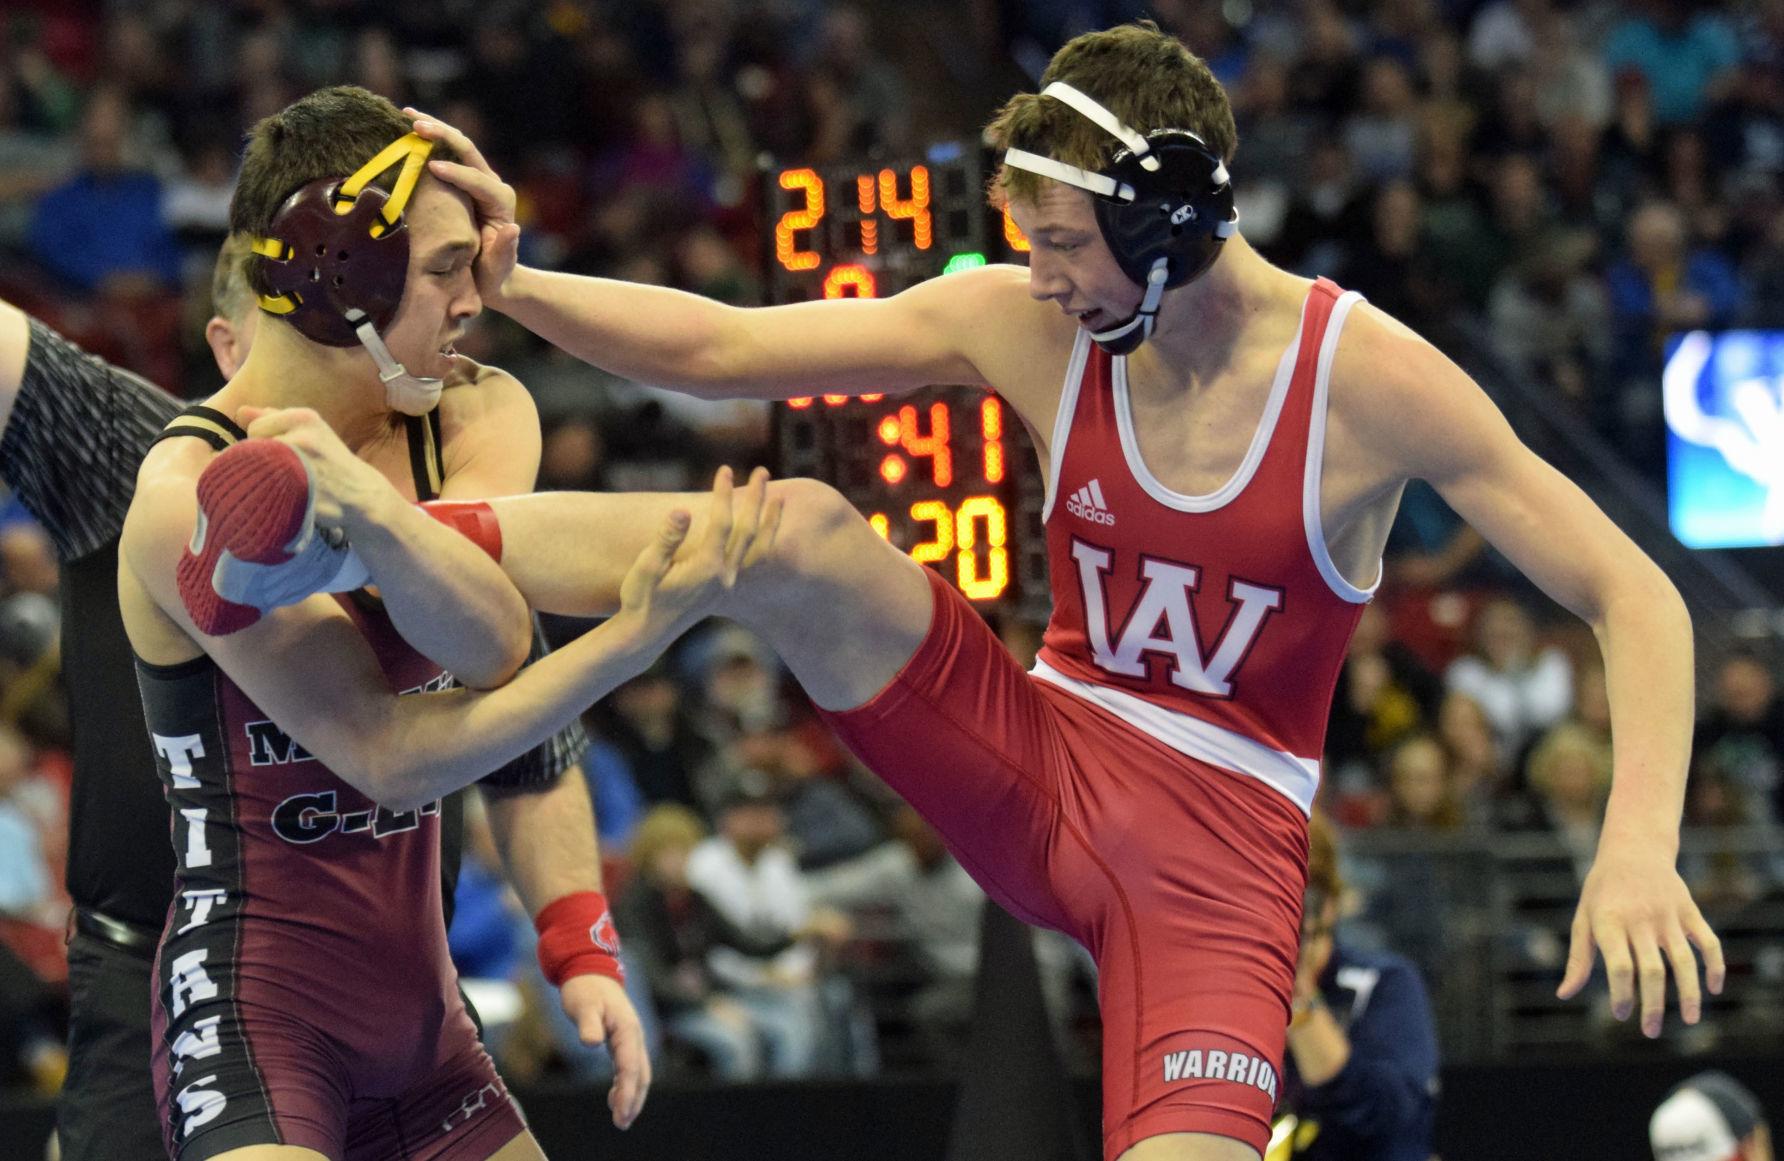 WIAA state wrestling gallery Day 2